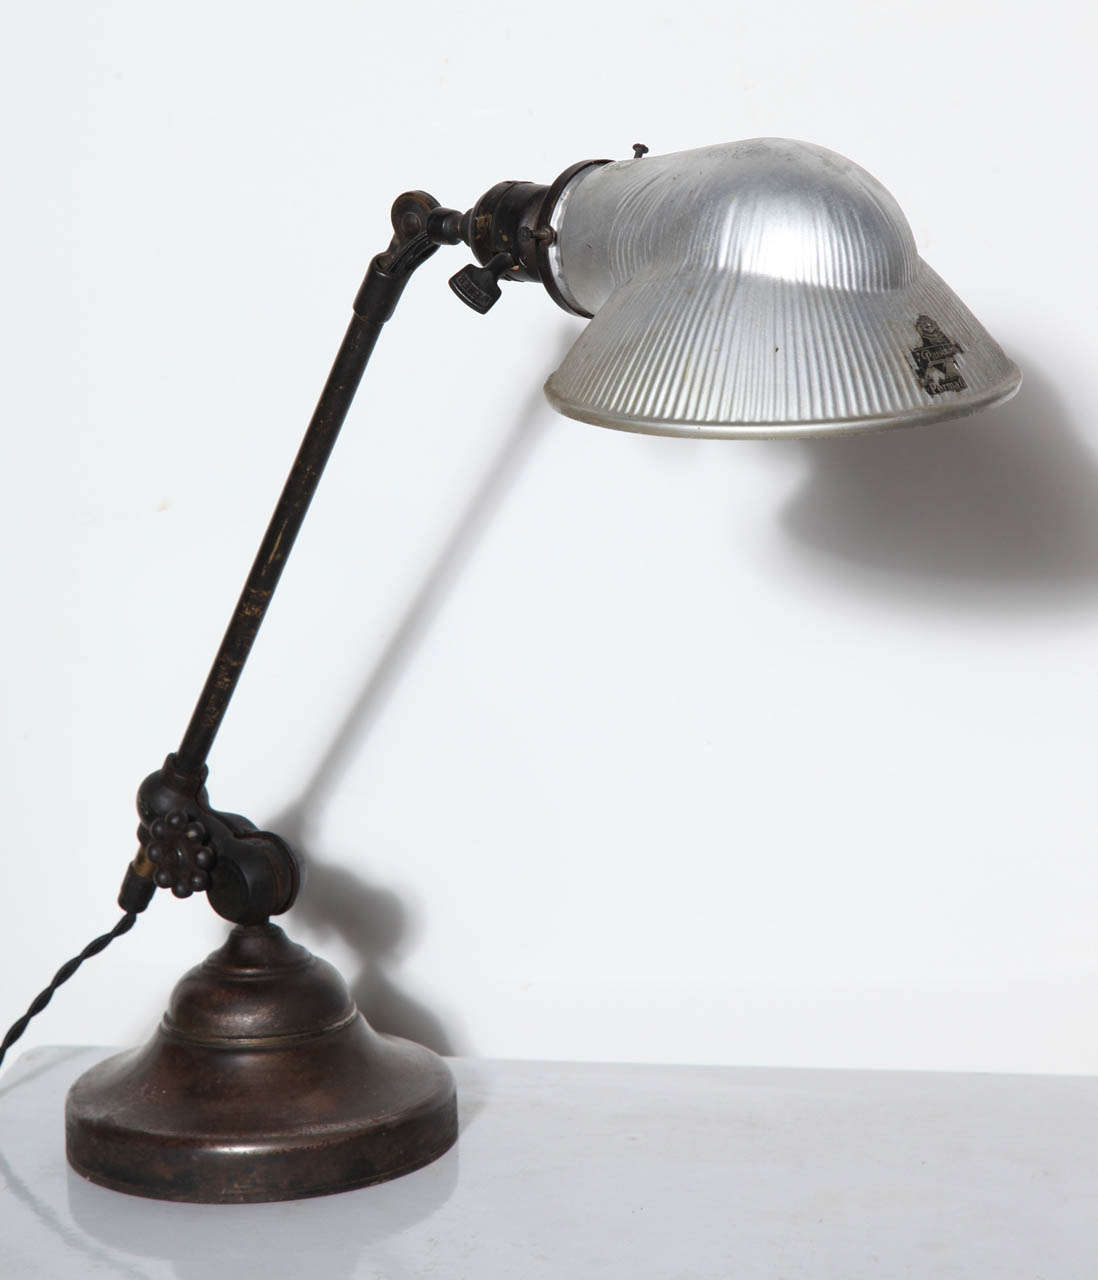 Early 20th Century Industrial O. C. White Brass, Iron and Glass Articulating Reading Lamp, Desk Lamp, Bedside Lamp. Featuring an adjustable rotating Brass arm on heavy round base with rich dark Bronze patina throughout.  With new old stock,